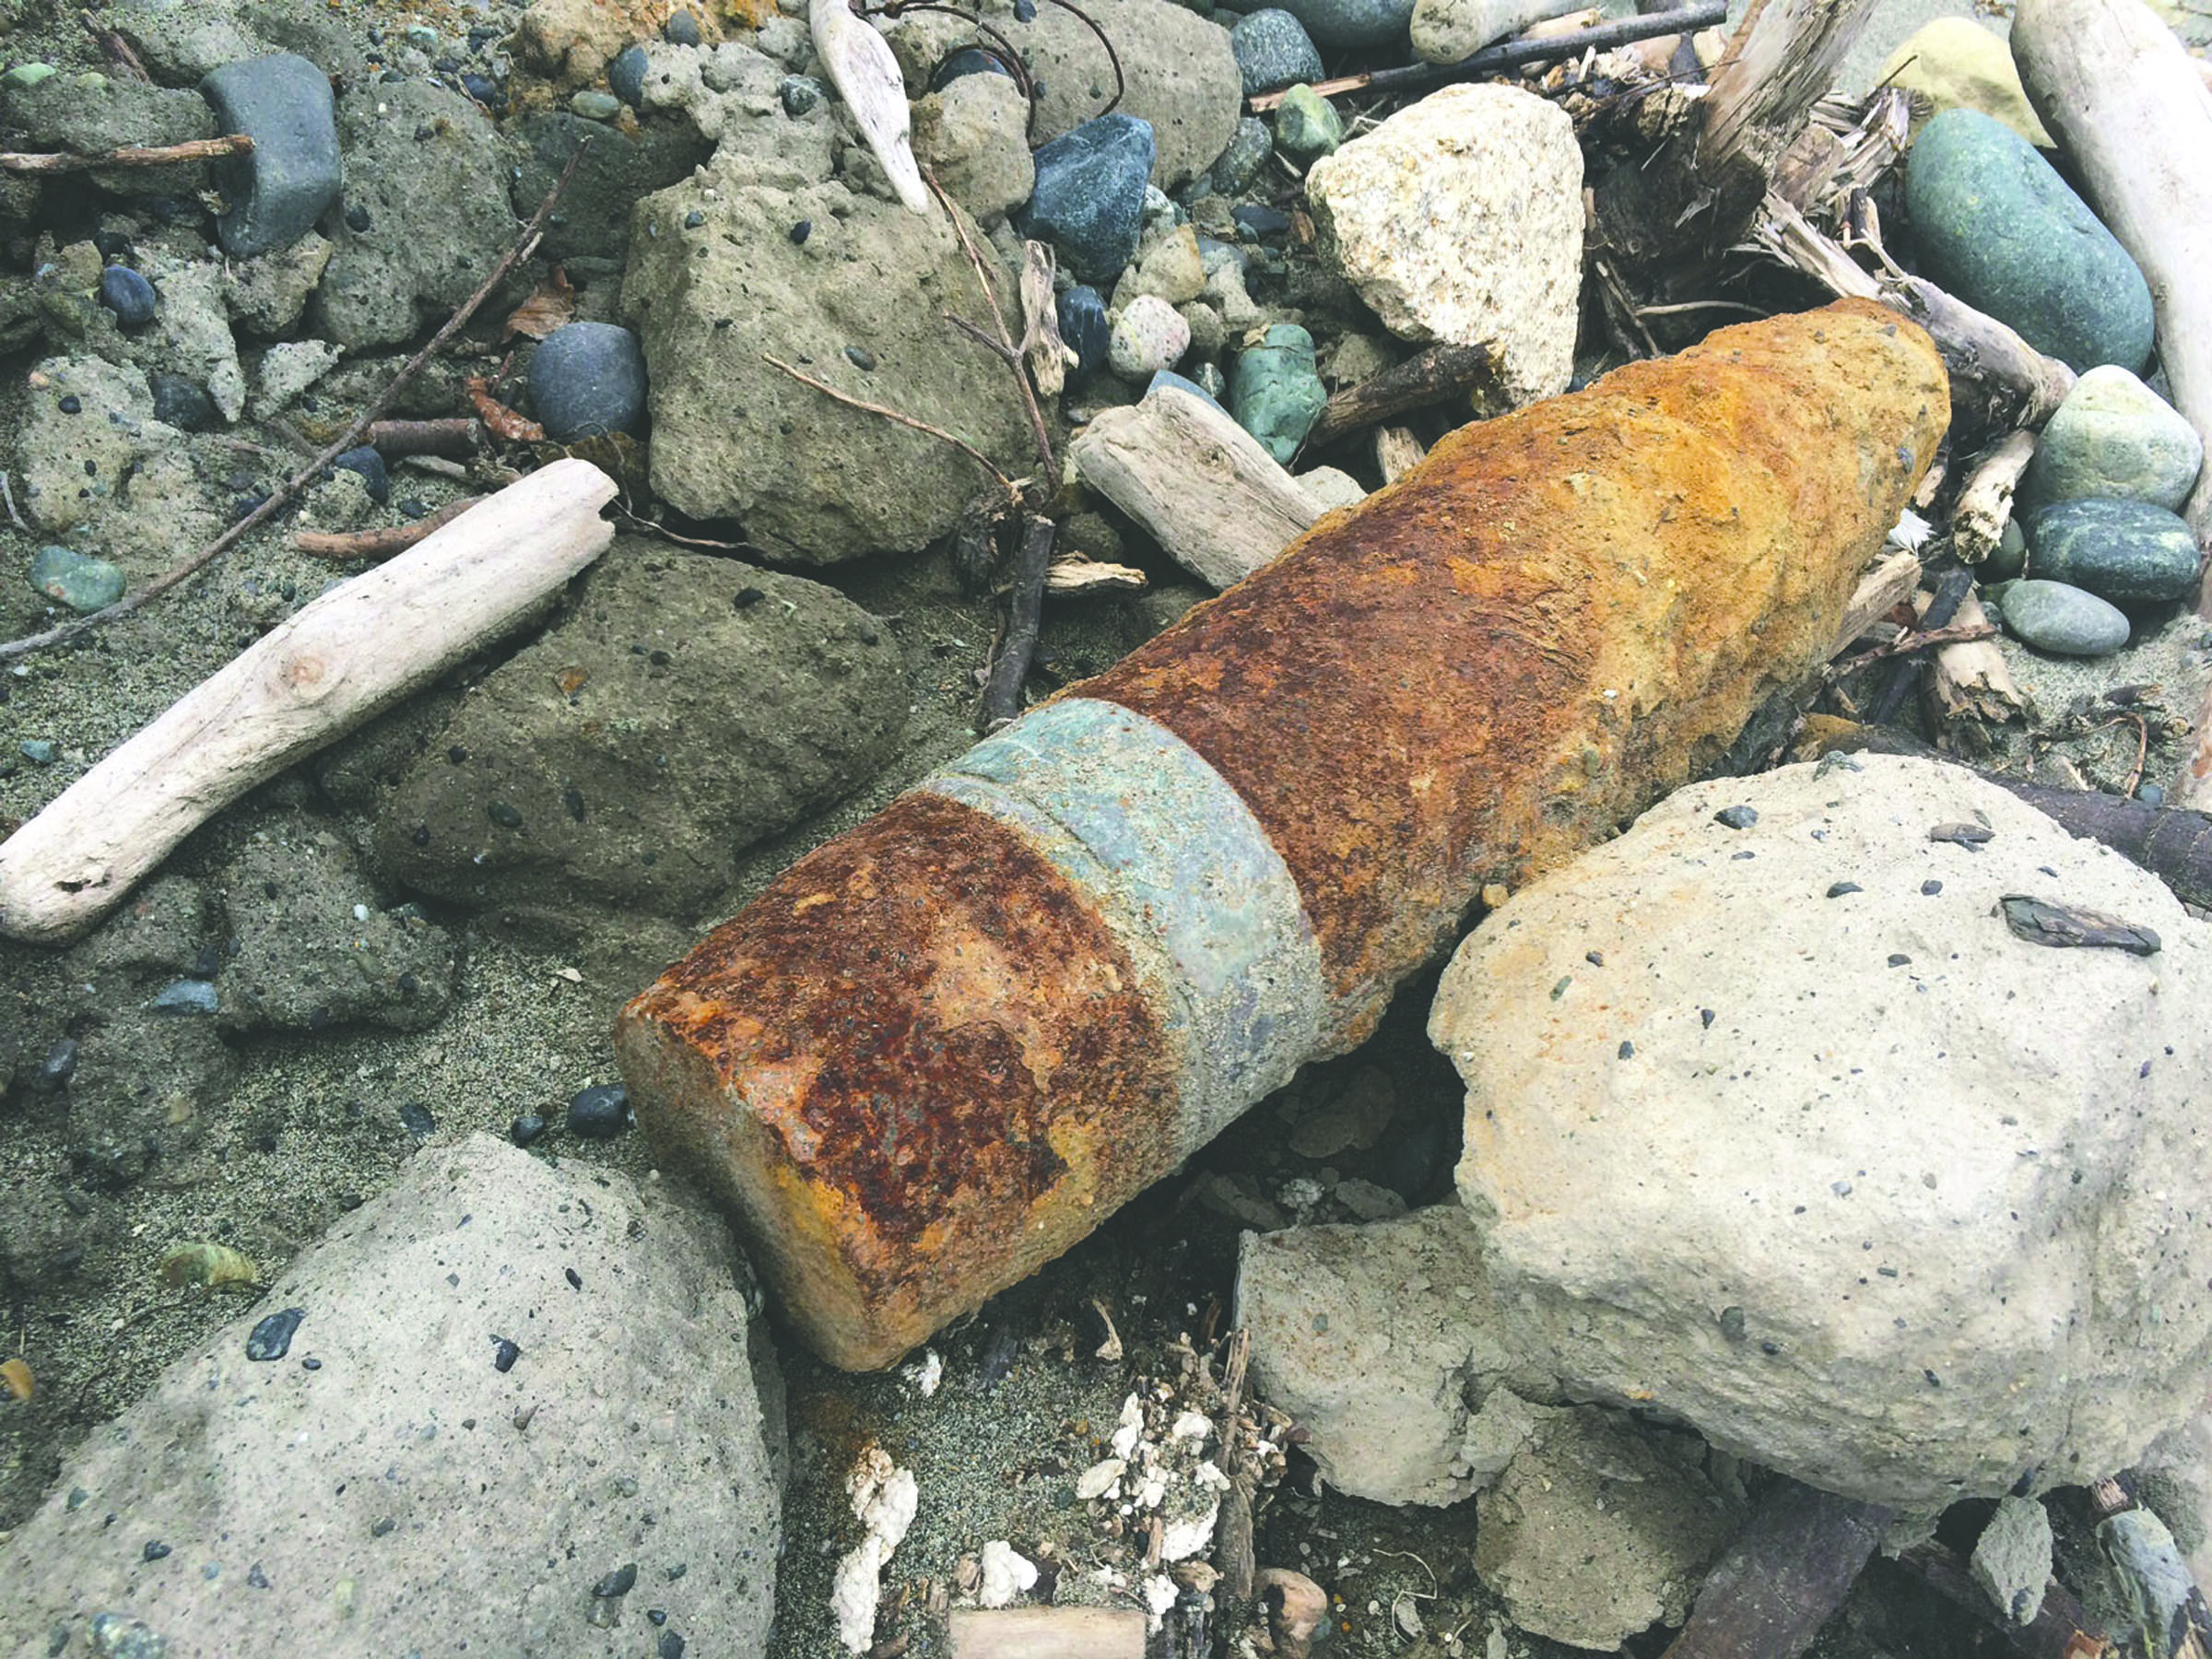 The Navy said this shell